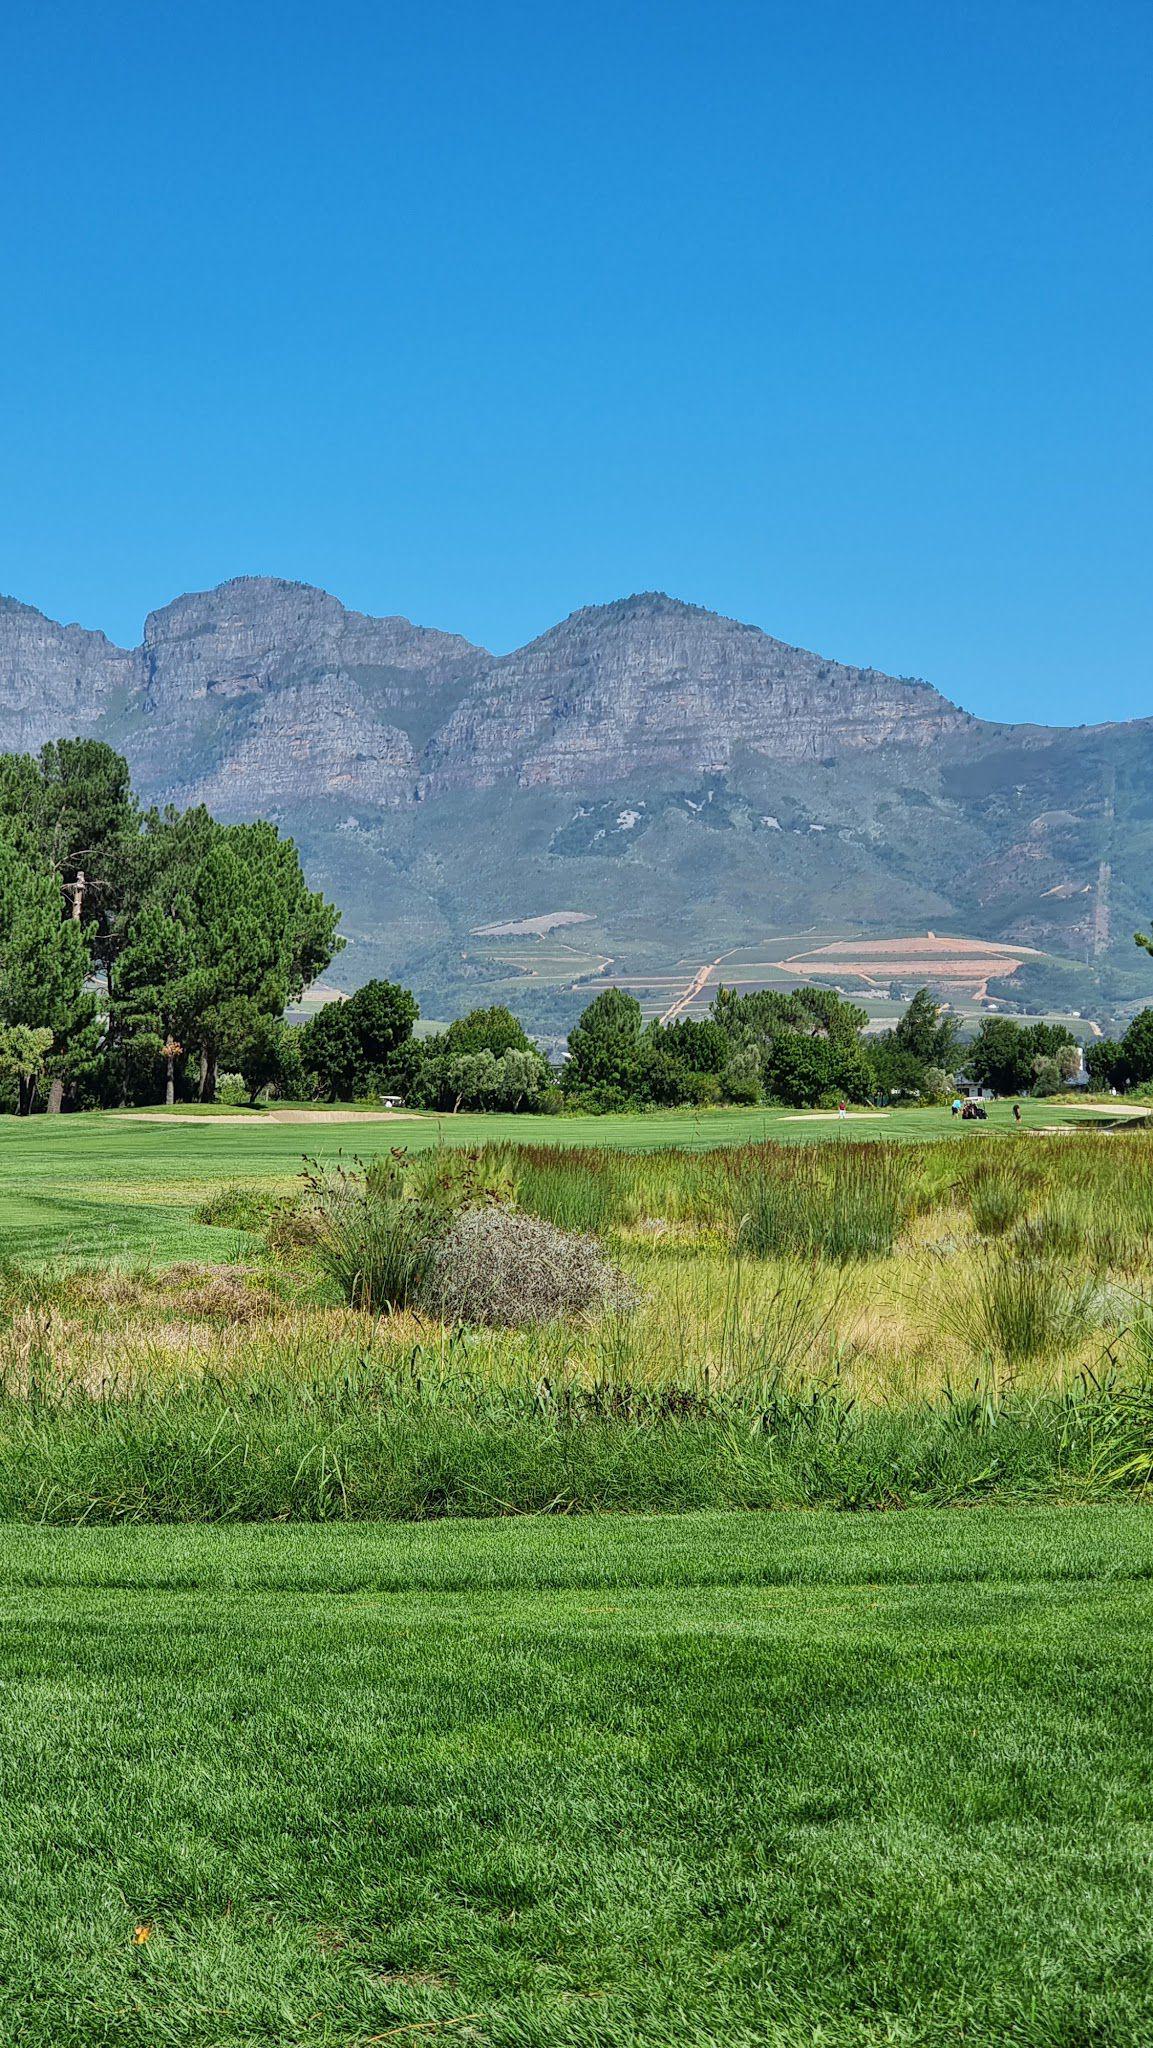 Complementary Colors, Ball Game, Sport, Golfing, Pearl Valley Jack Nicklaus Signature golf course, Pearl Valley Jack Nicklaus Signature golf course R301 Wemmershoek, Road, Paarl, 7646